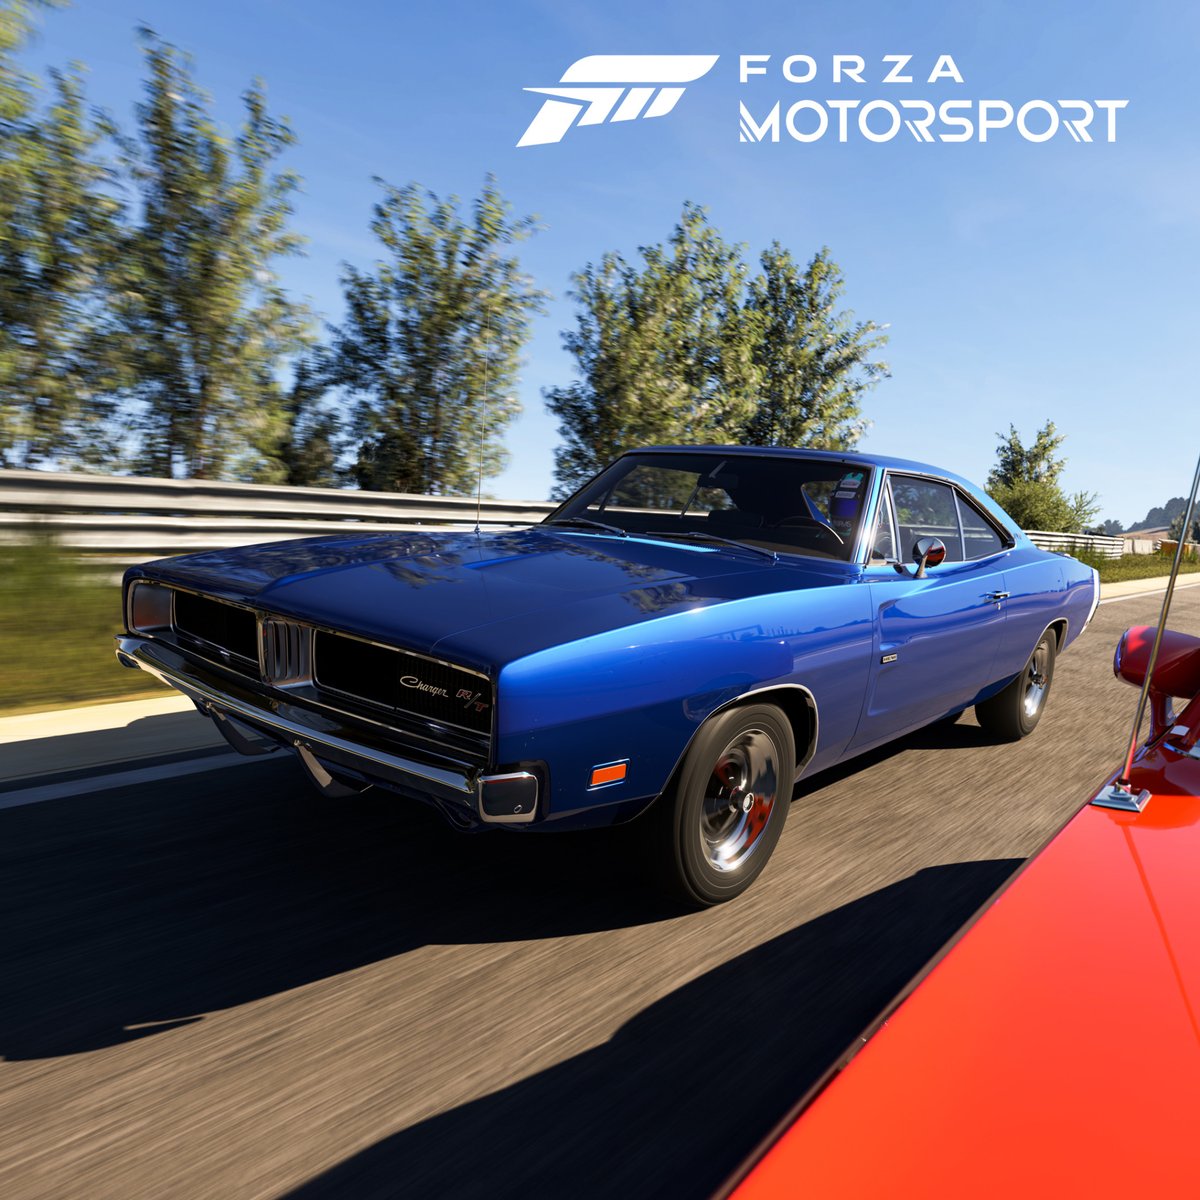 Hear the classic engine of the '69 Charger roar through the greatest tracks from all over the world on #ForzaMotorsport